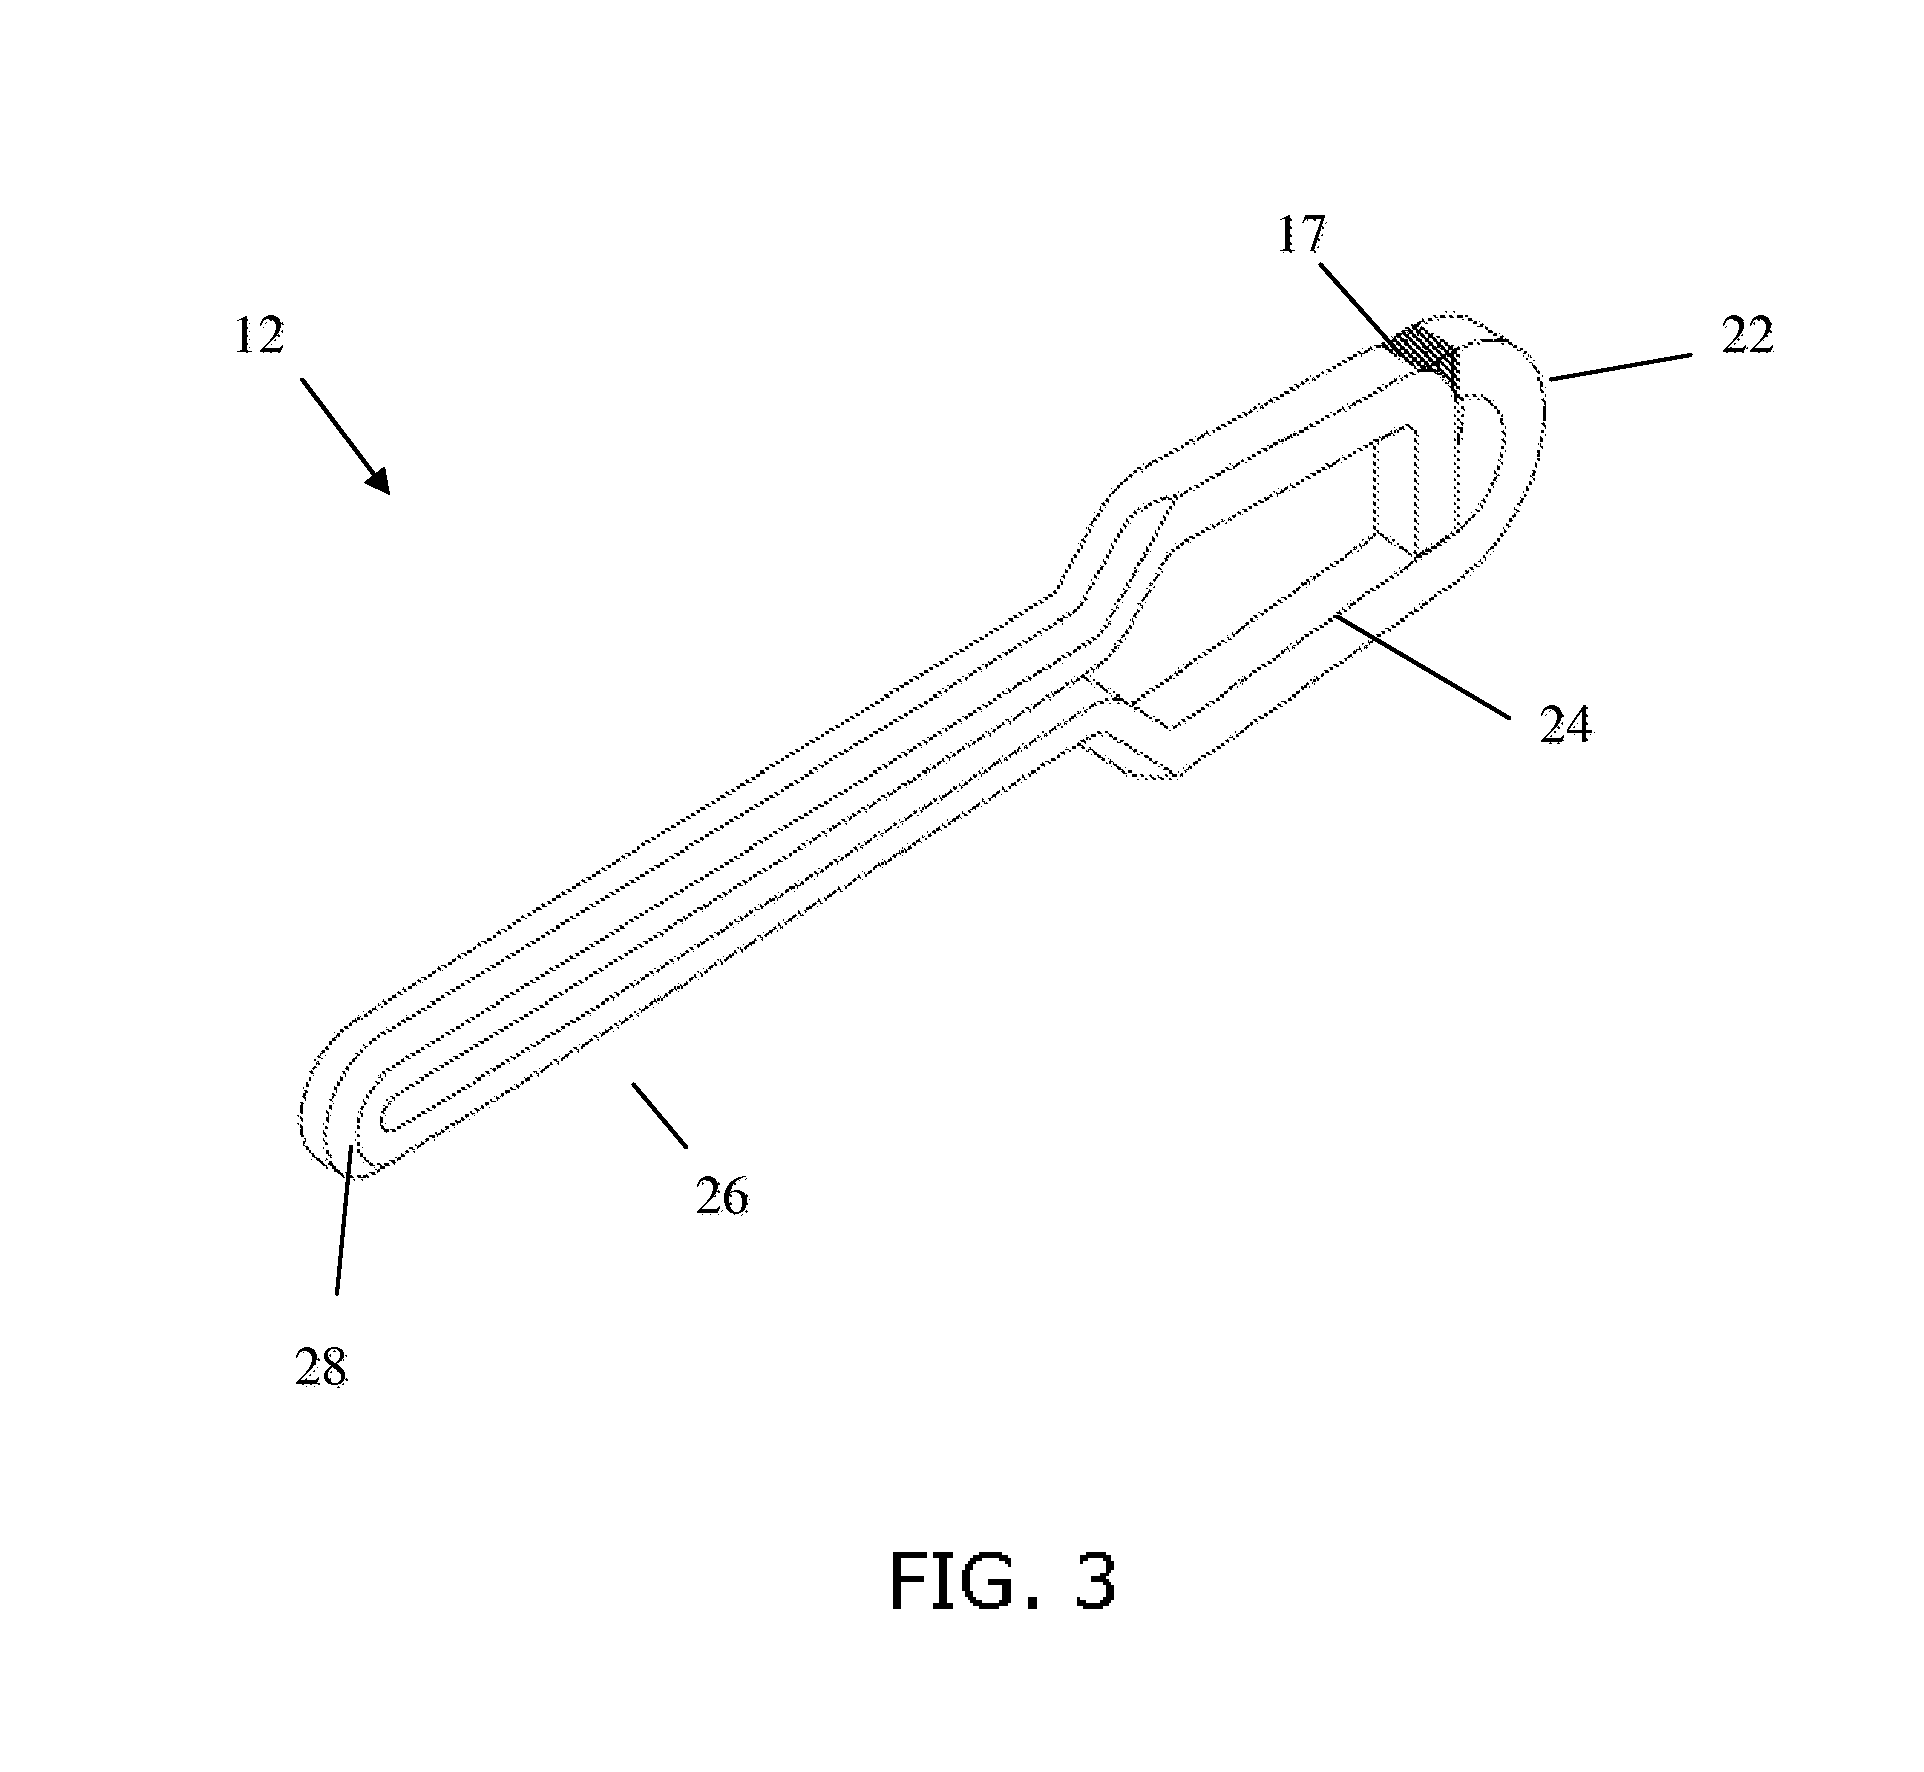 Apparatus and Method for Facilitating the Lifting of Heavy Objects